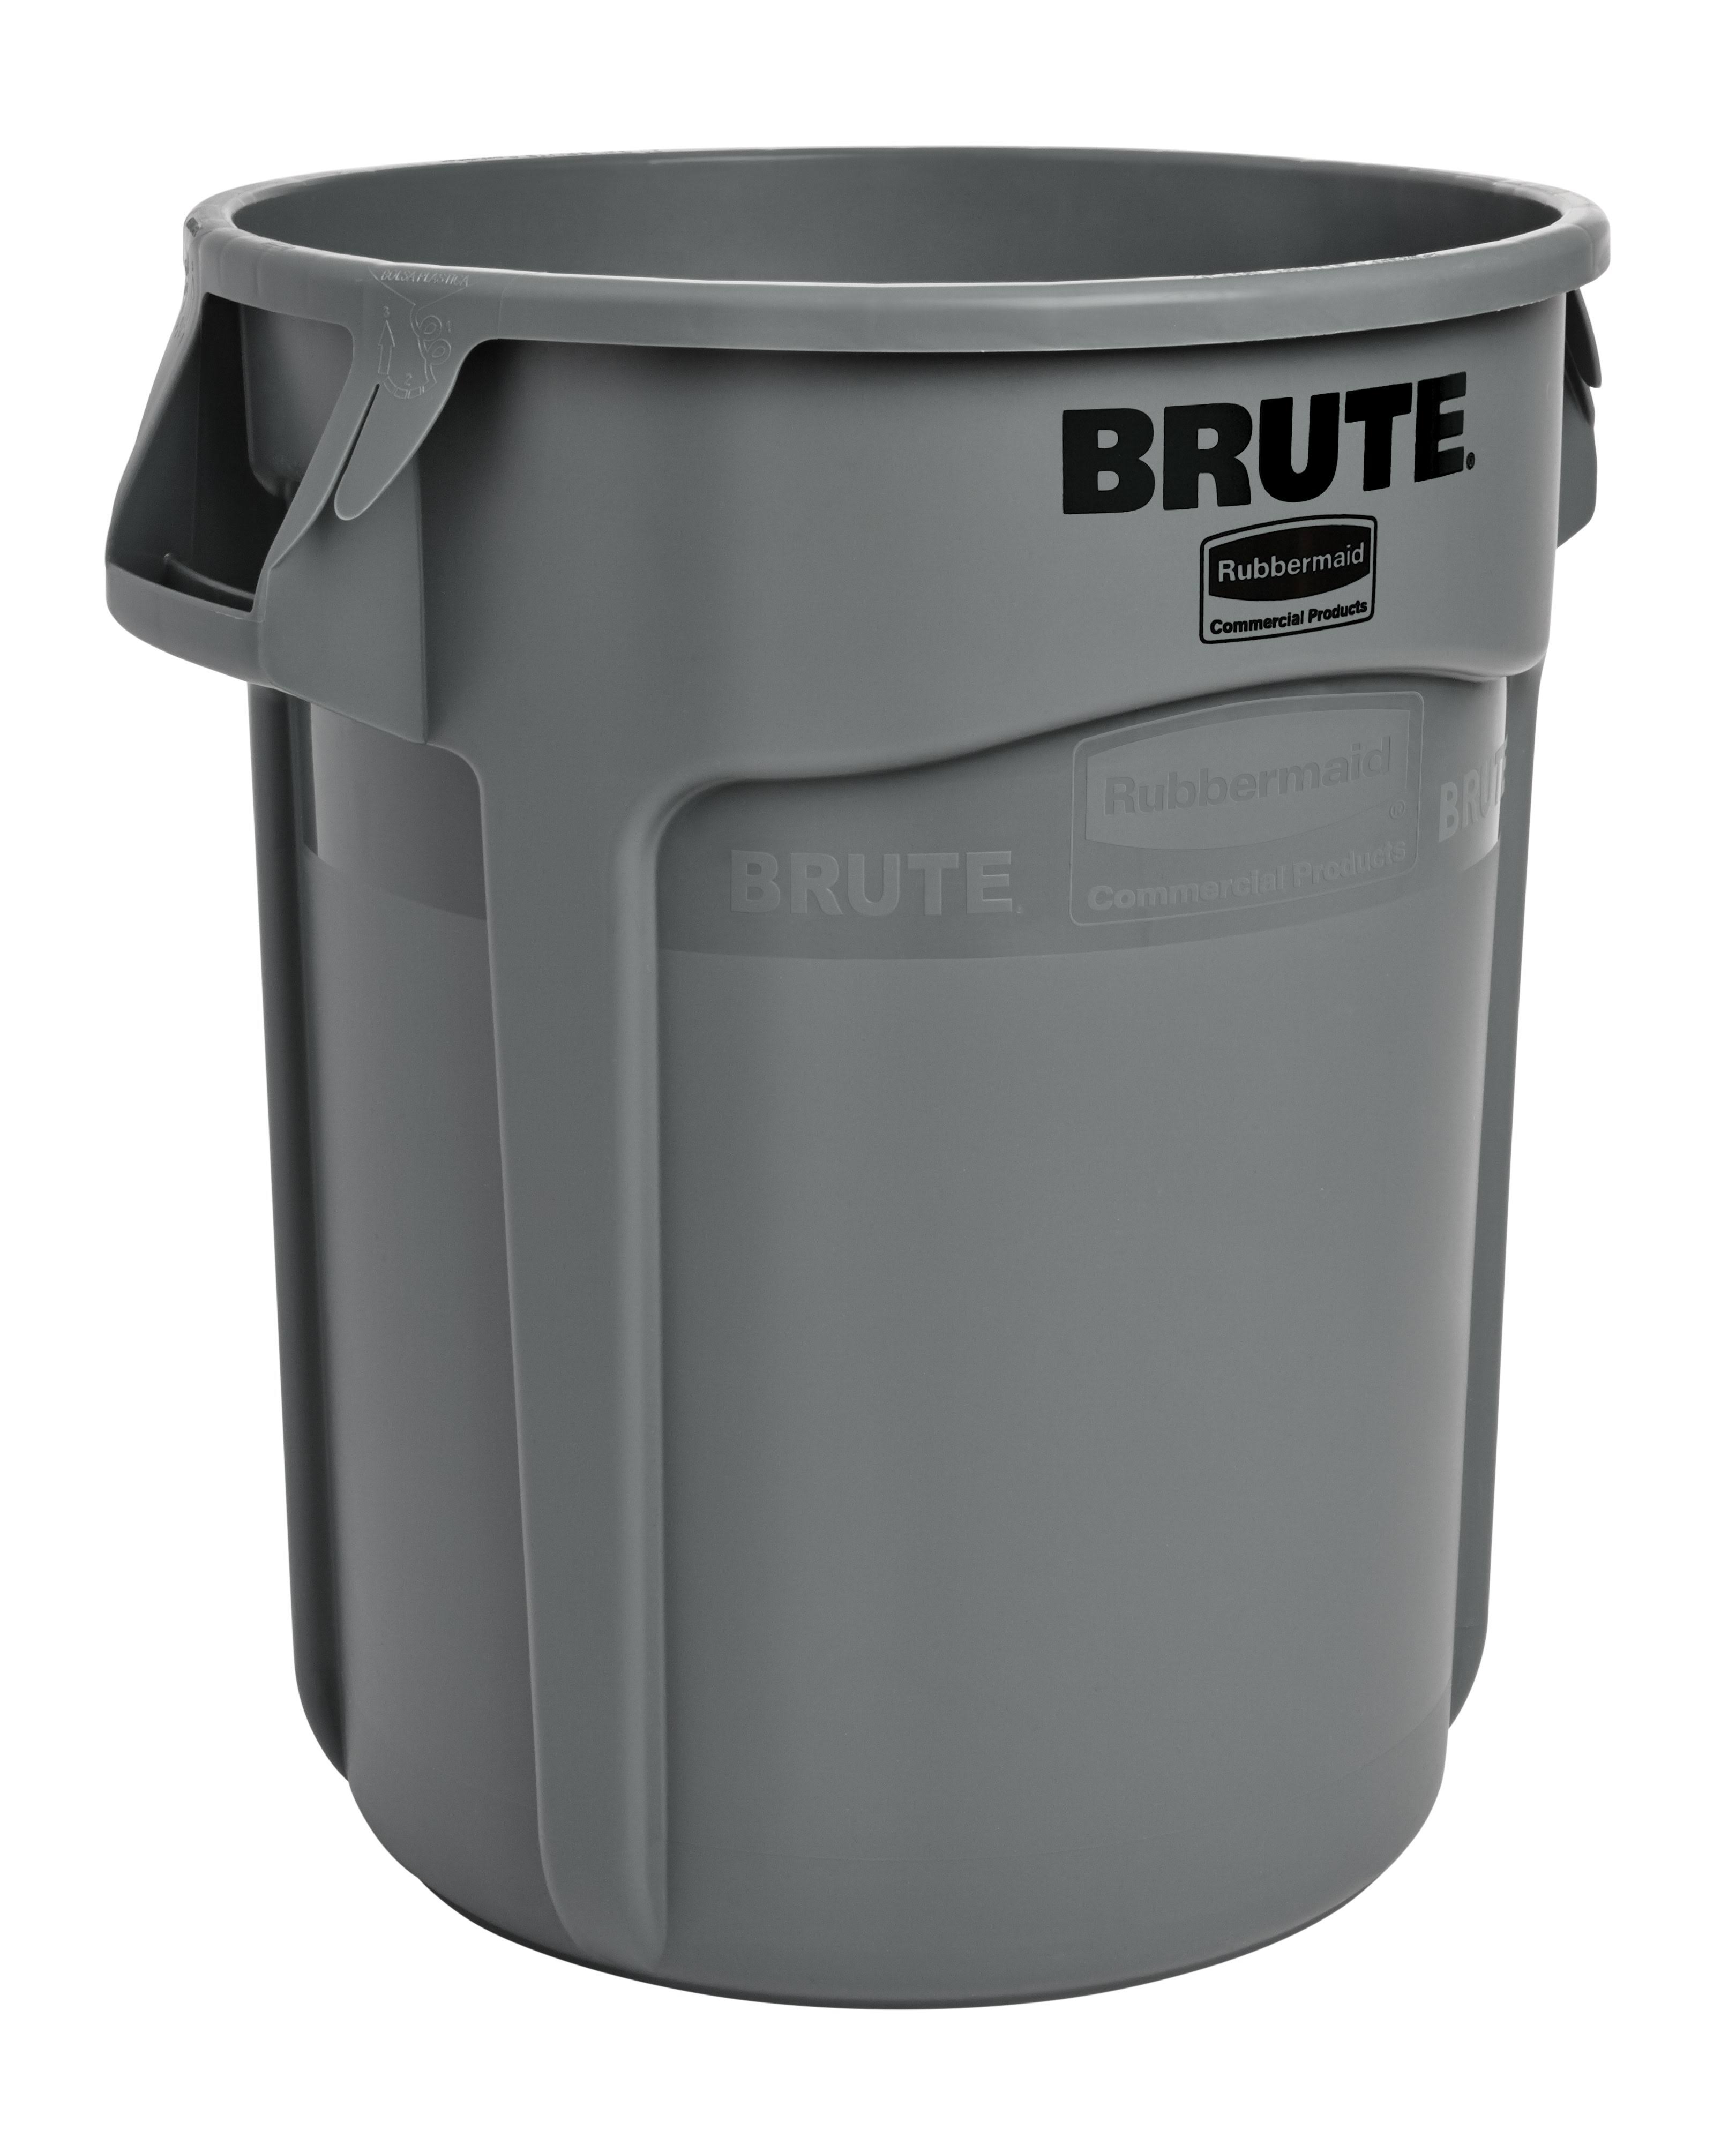 Rubbermaid Brute Container - Gray